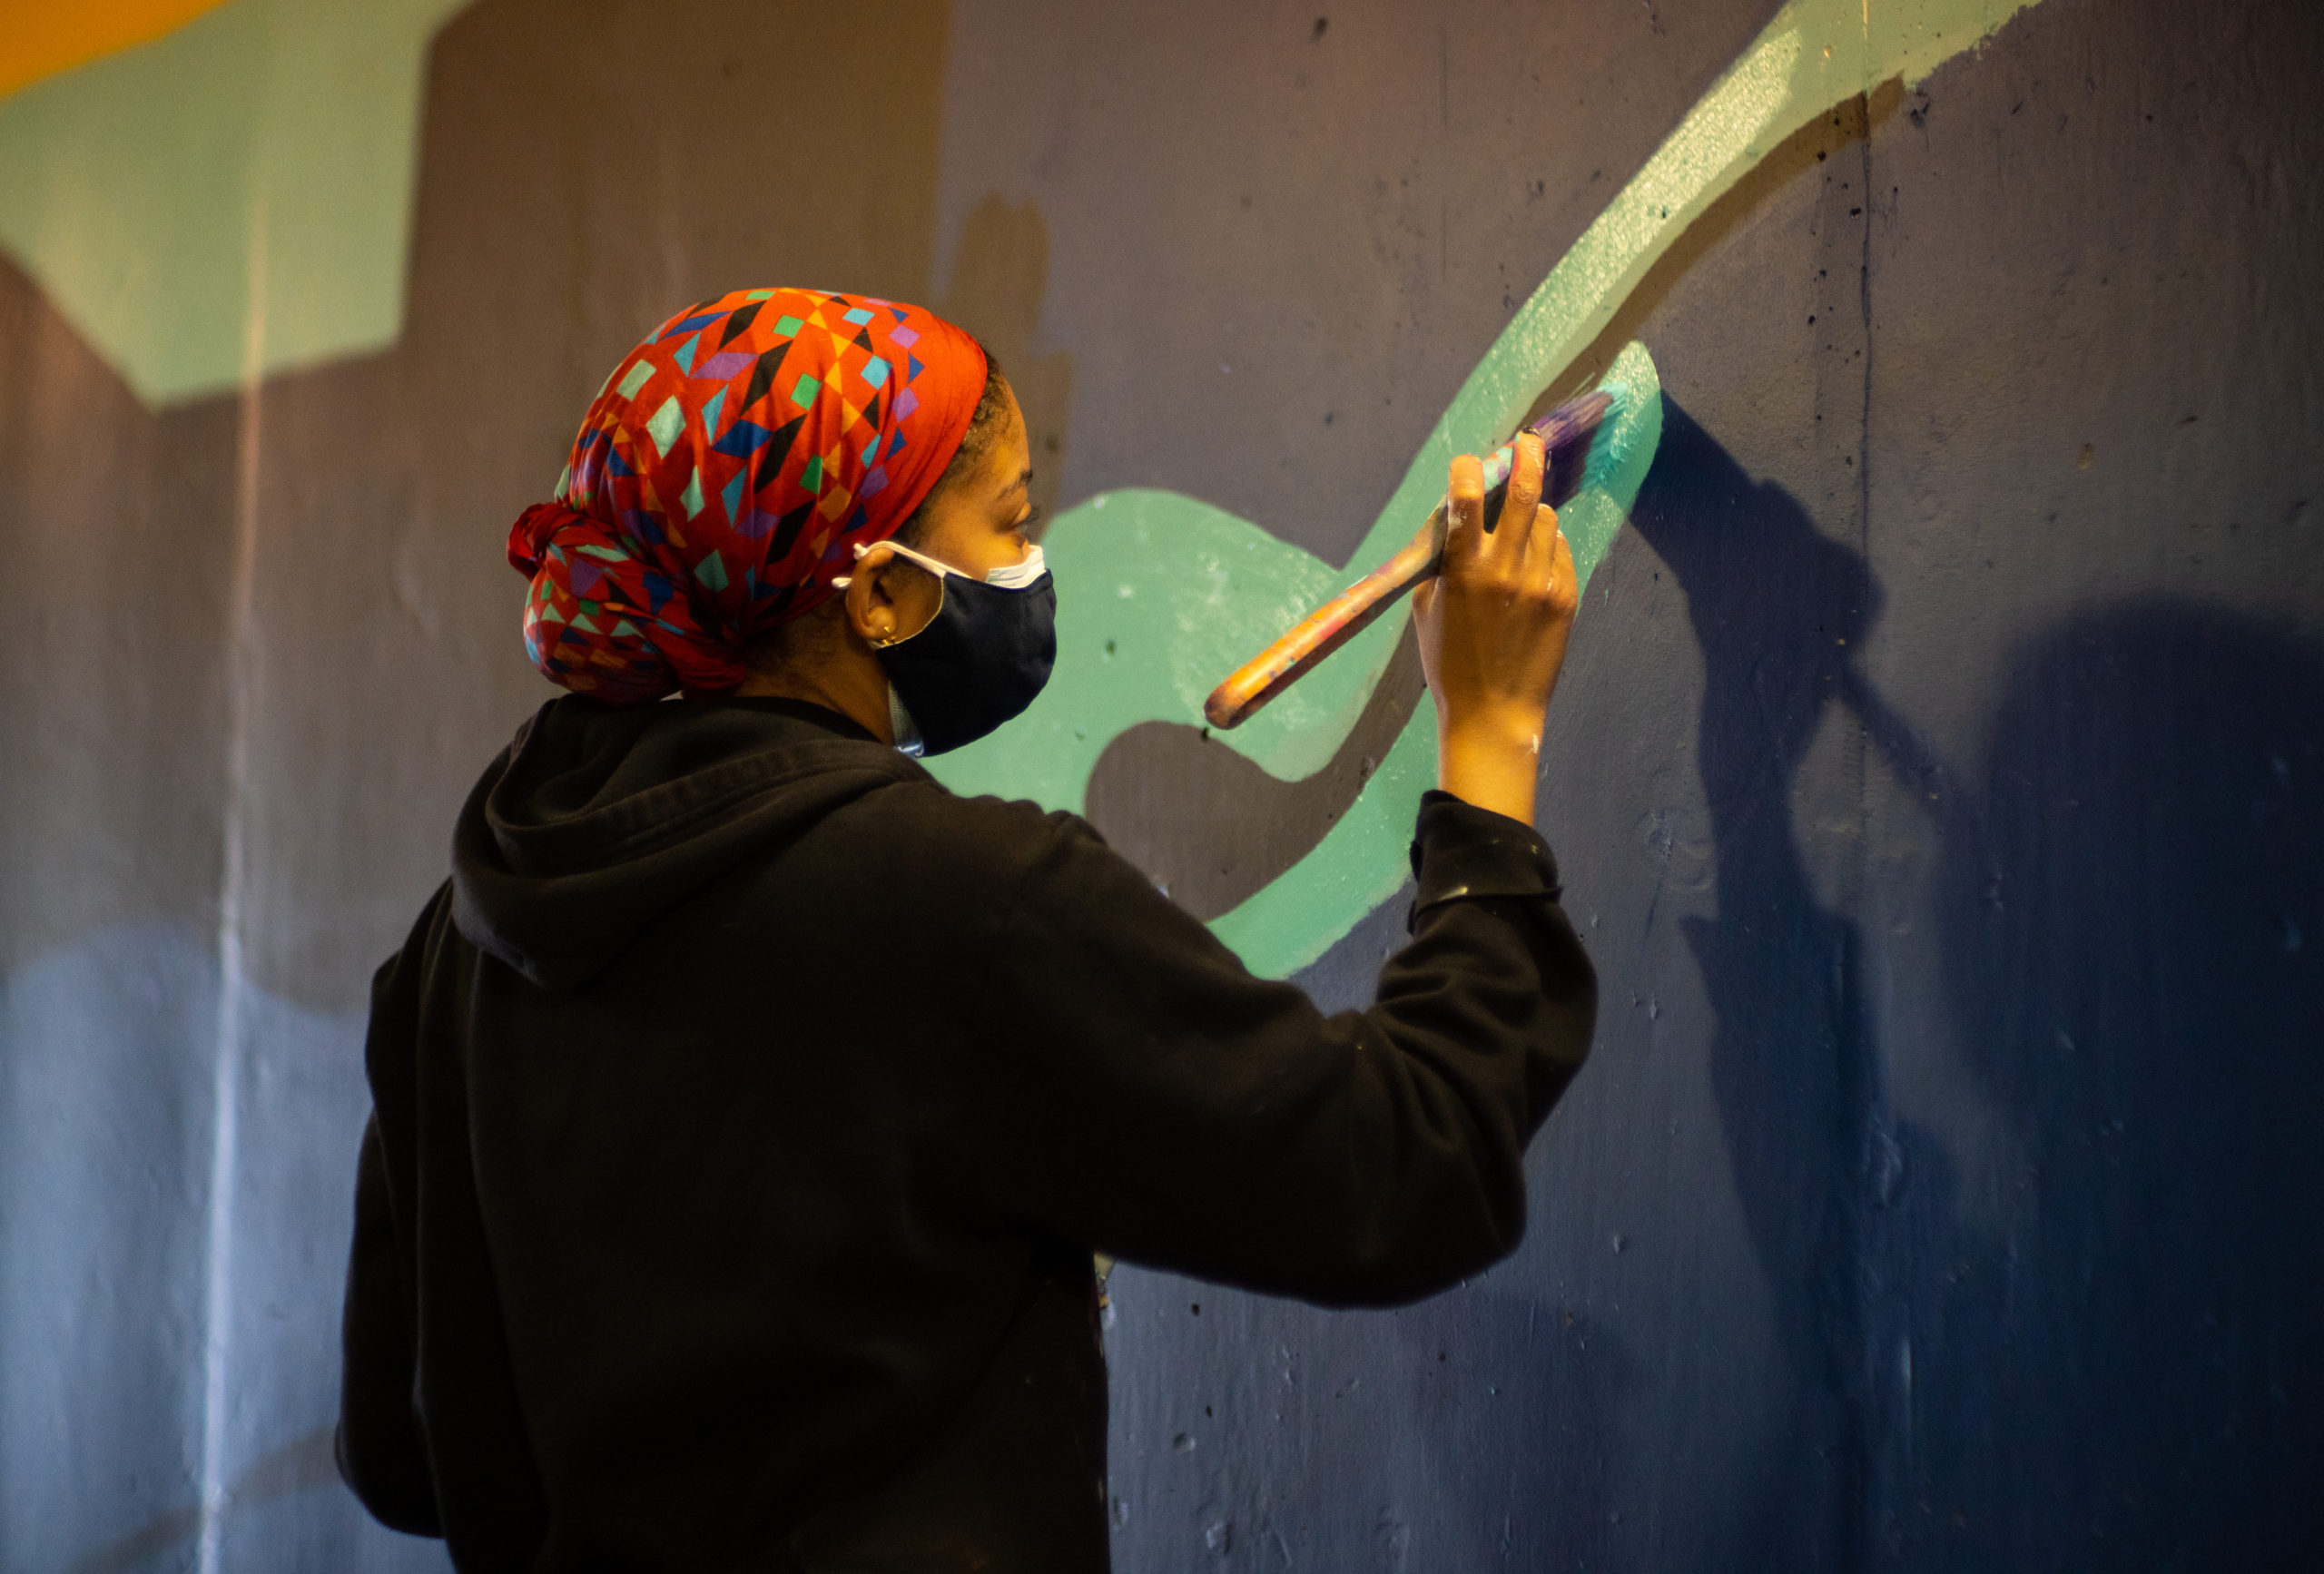 Photograph of art assistant Edan Maxam painting a mural in the entrance of Wilson TTC Station. Edan is wearing a mask, her hair is wrapped with a patterned fabric and she is wearing a black hoodie. The mural has colours of navy blue and green.